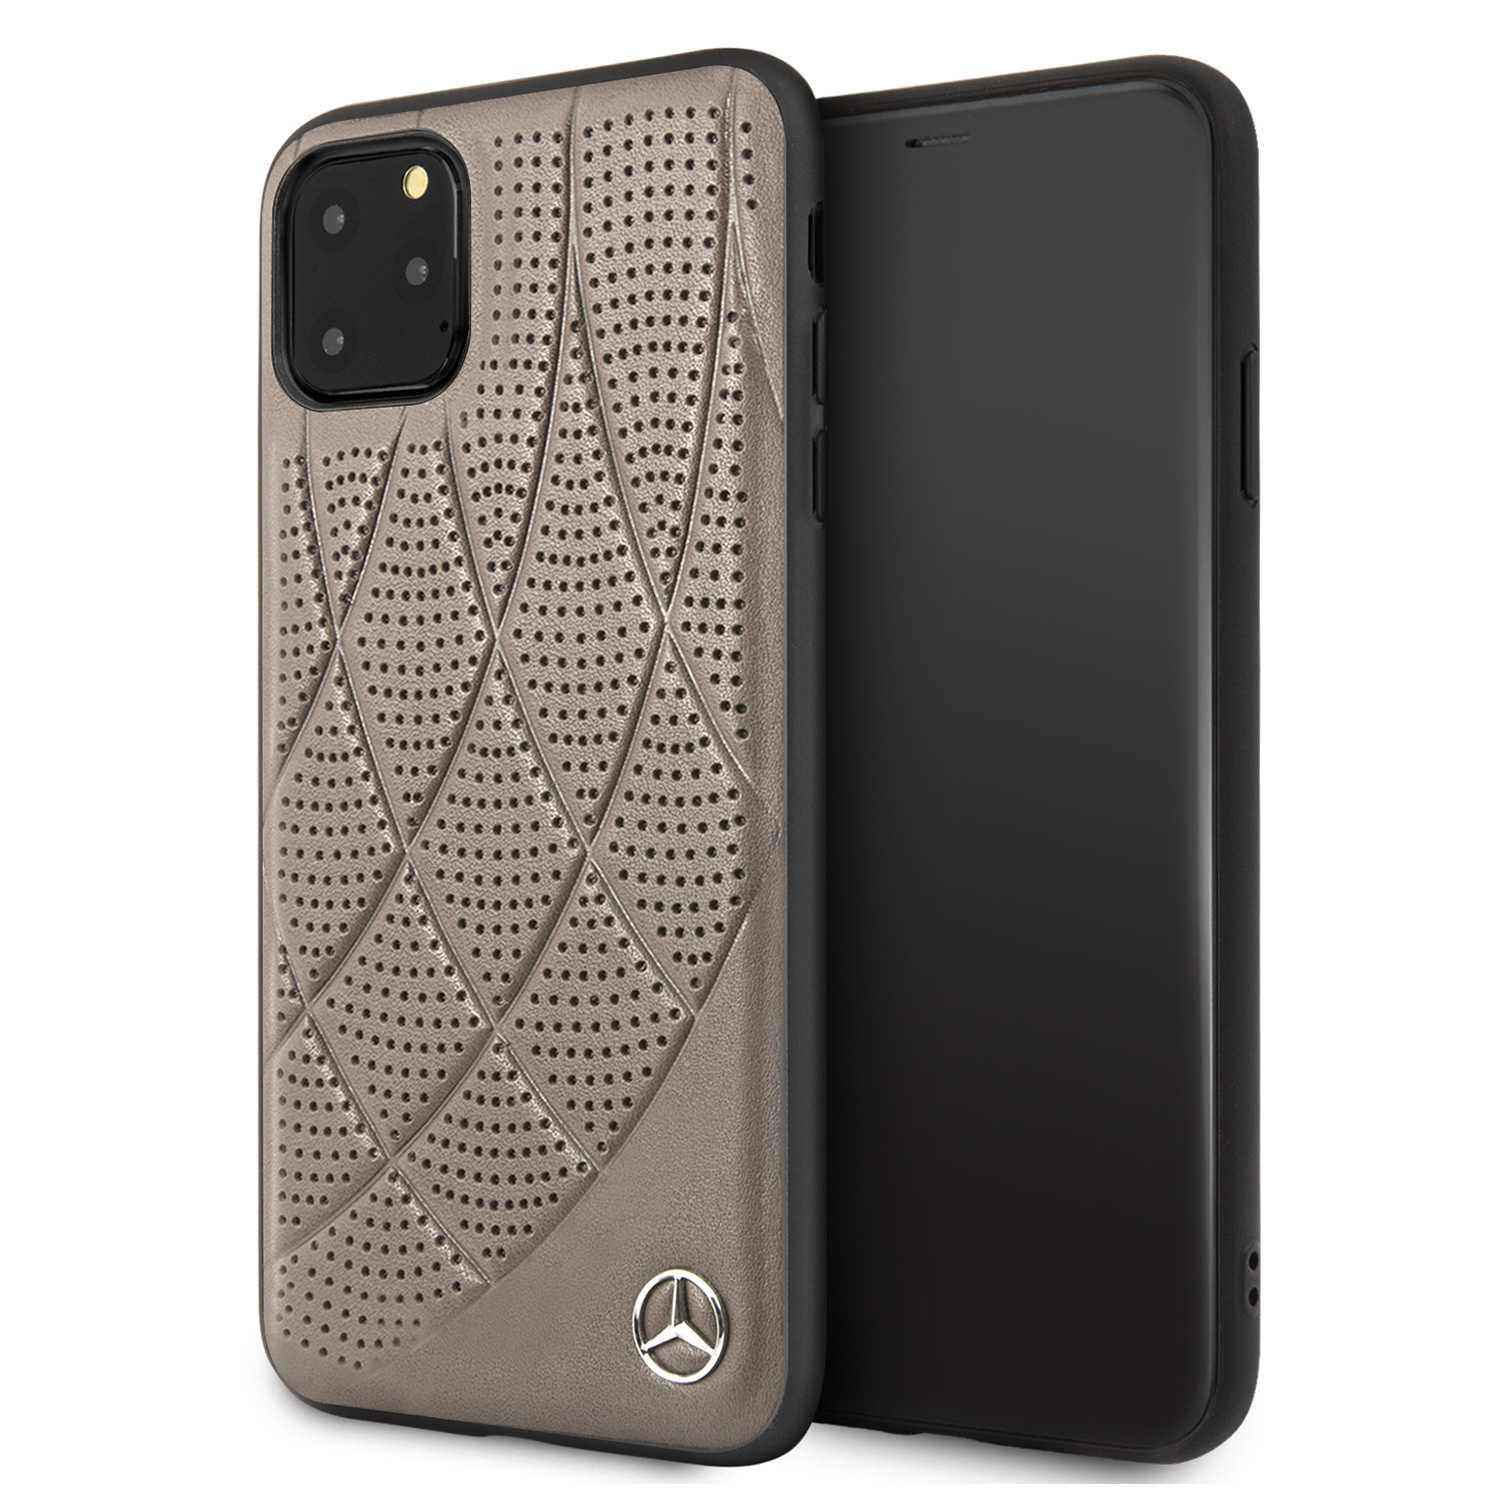 Mercedes-Benz mercedes hard case quilted perforated genuine leather iphone 11 pro max brown